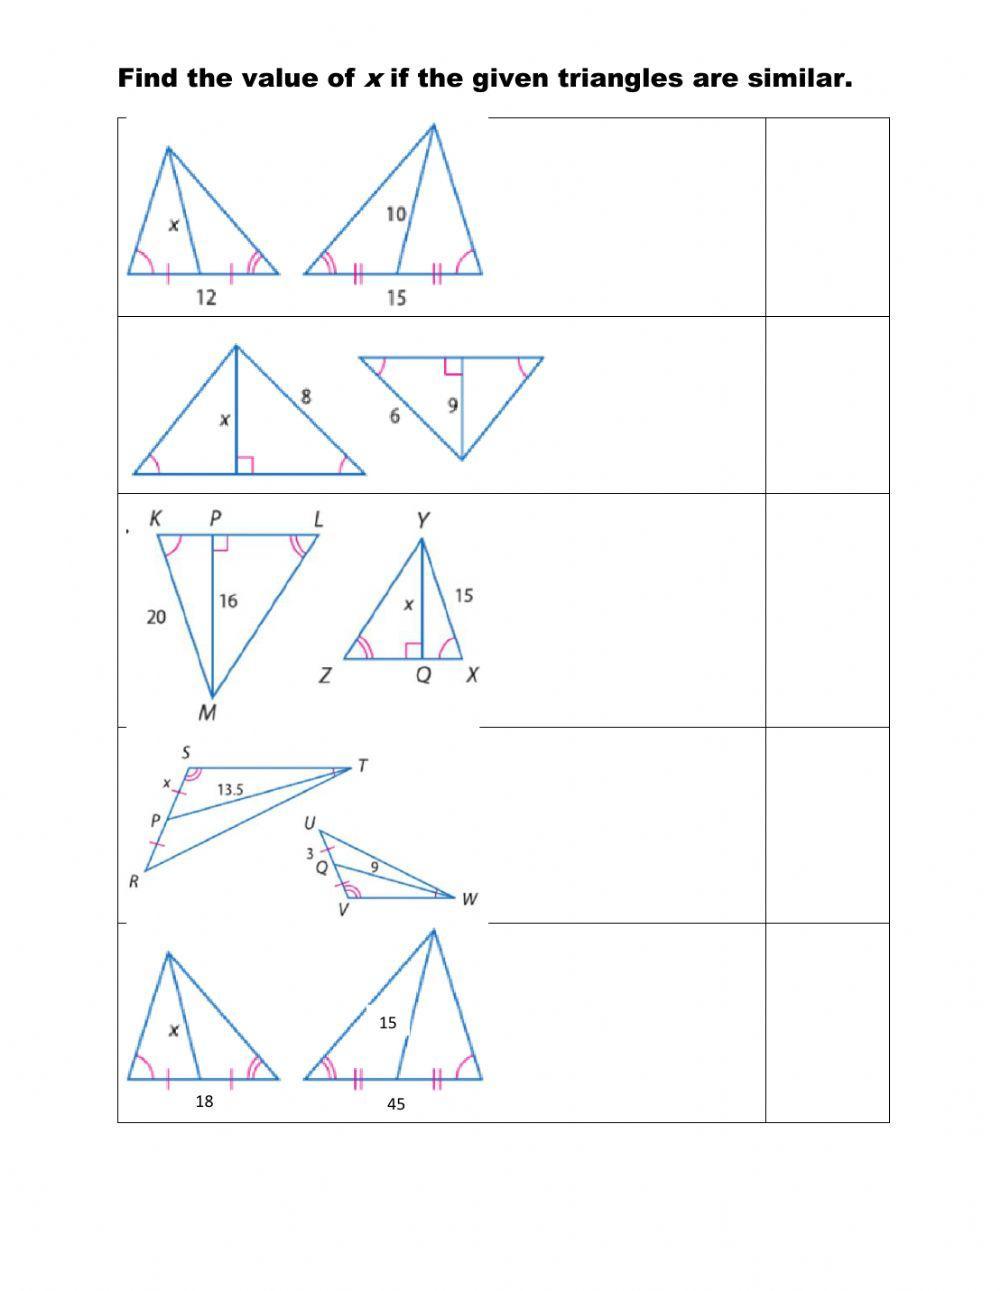 Using proportions with special segments of similar triangles